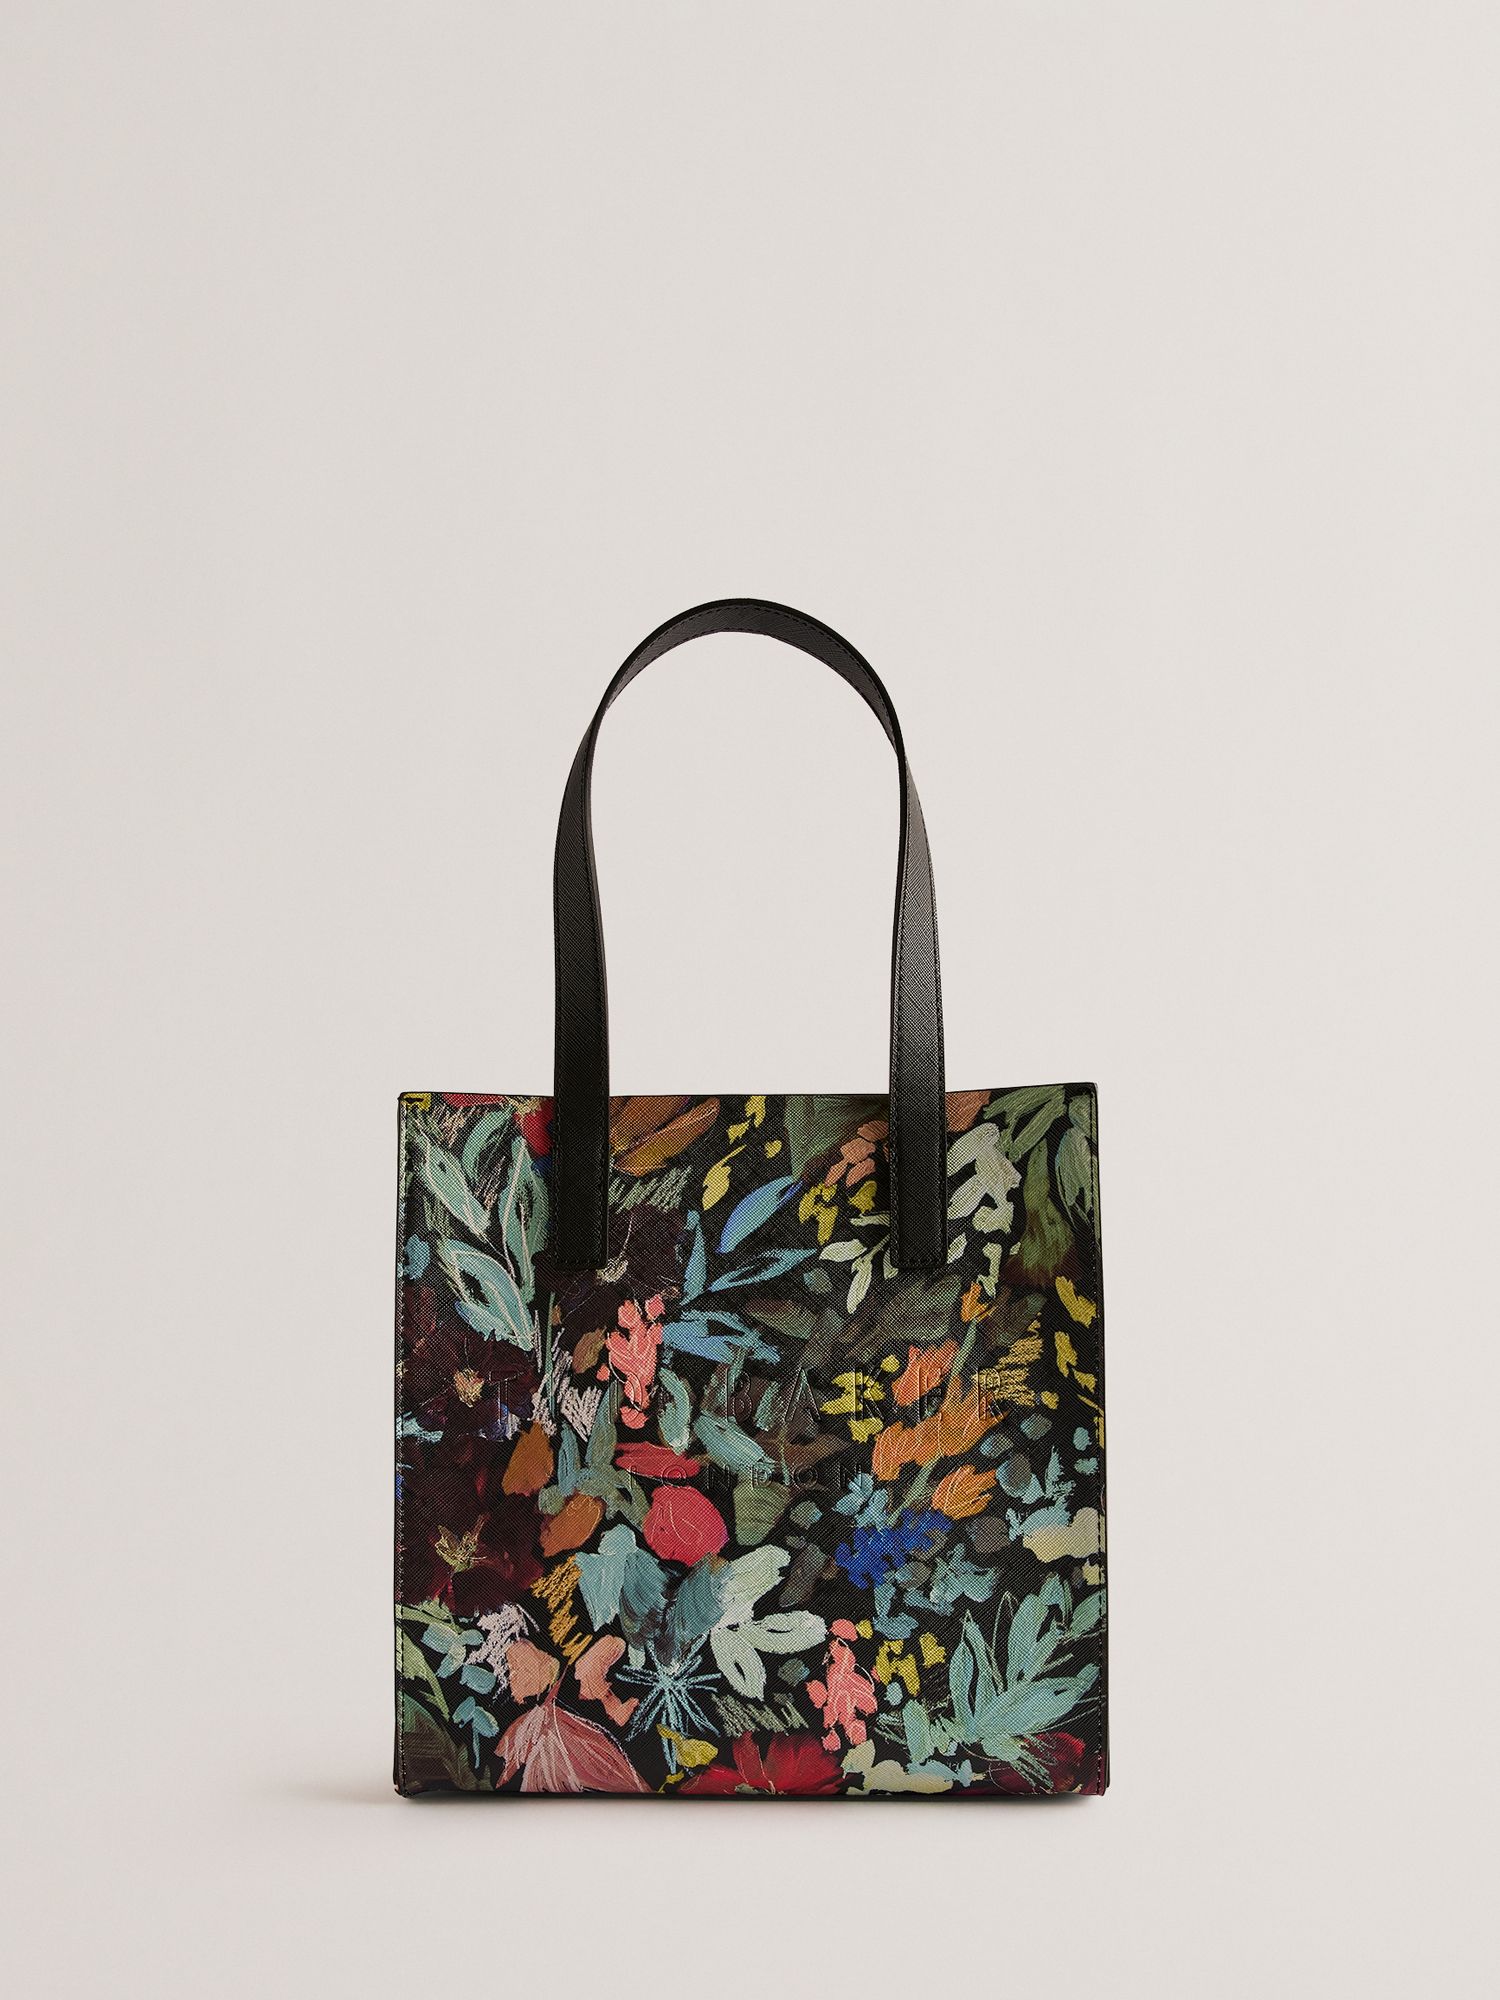 Ted Baker Beaicon Floral Tote Bag, Black/Multi, One Size